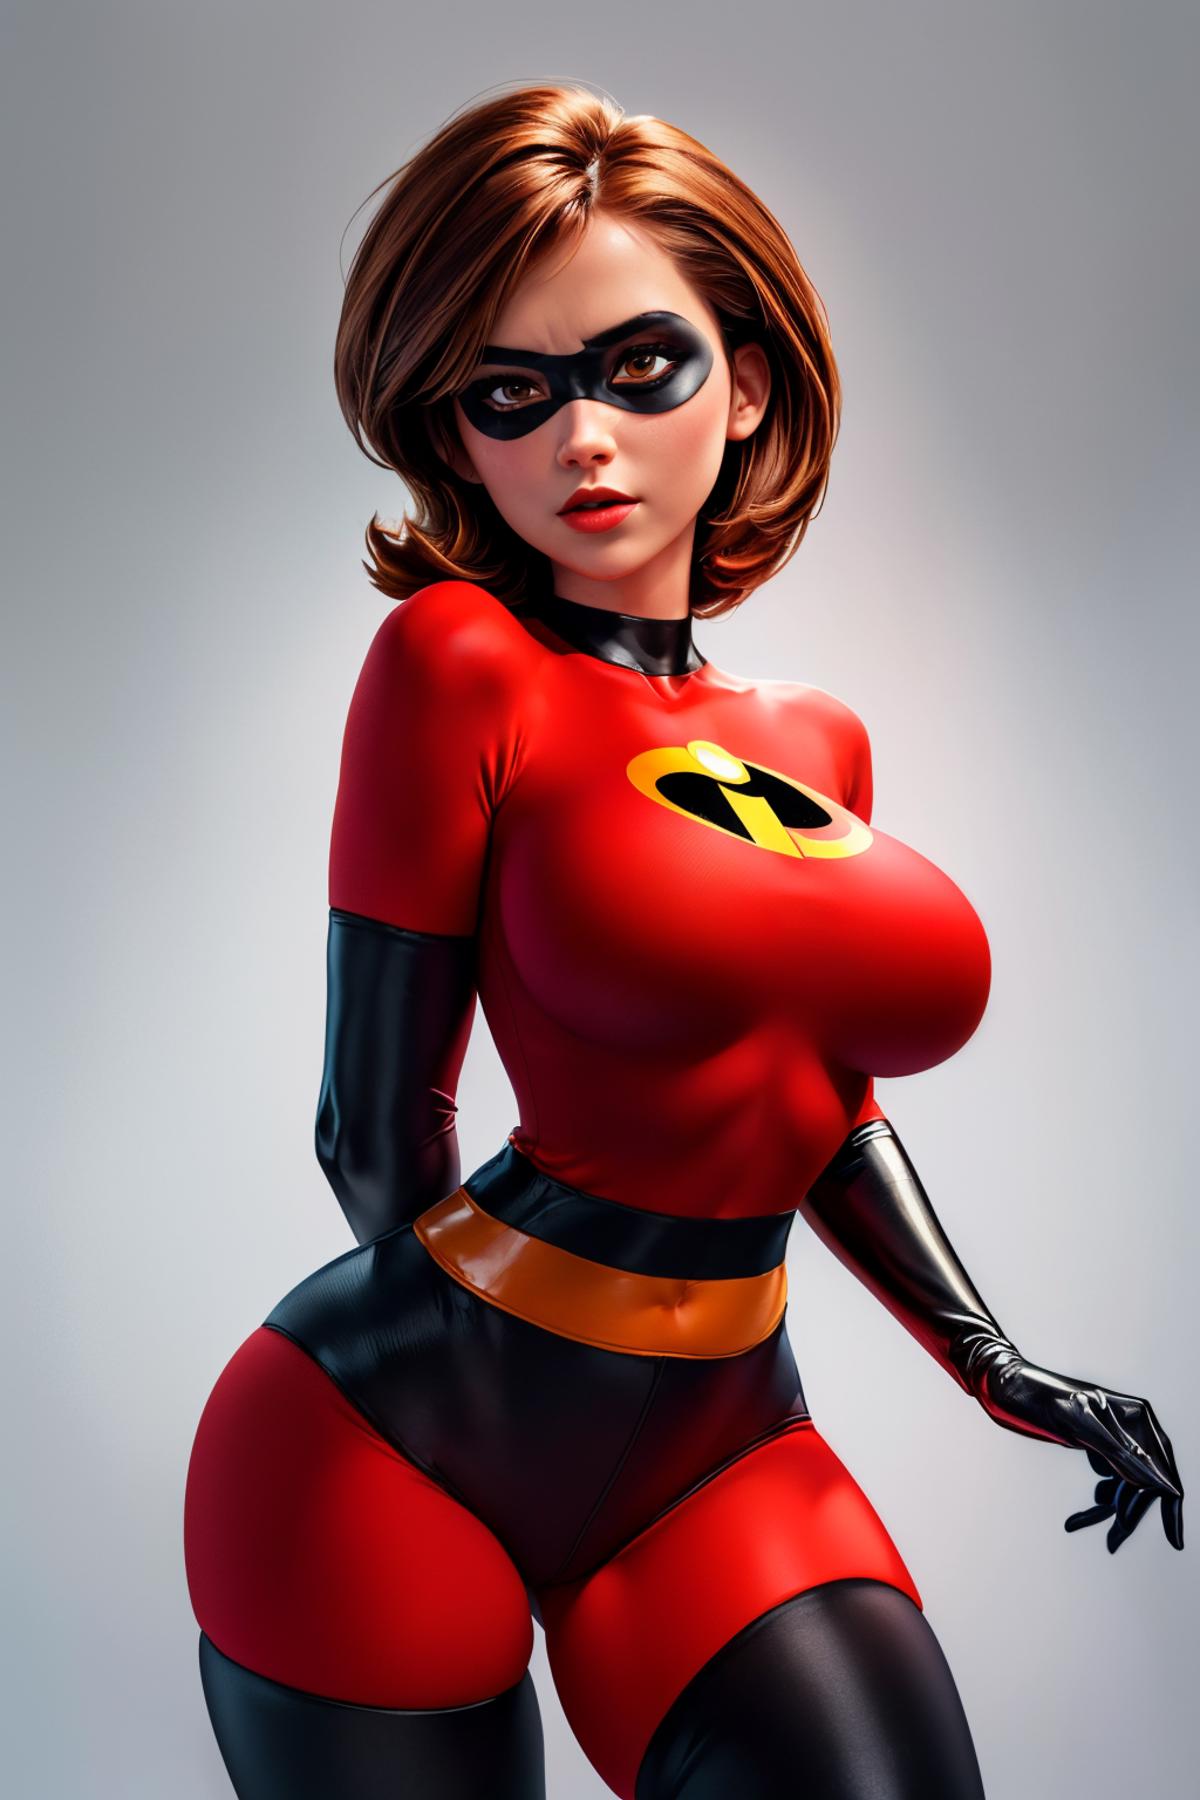 Helen Parr - The Incredibles - Character LORA image by iJWiTGS8